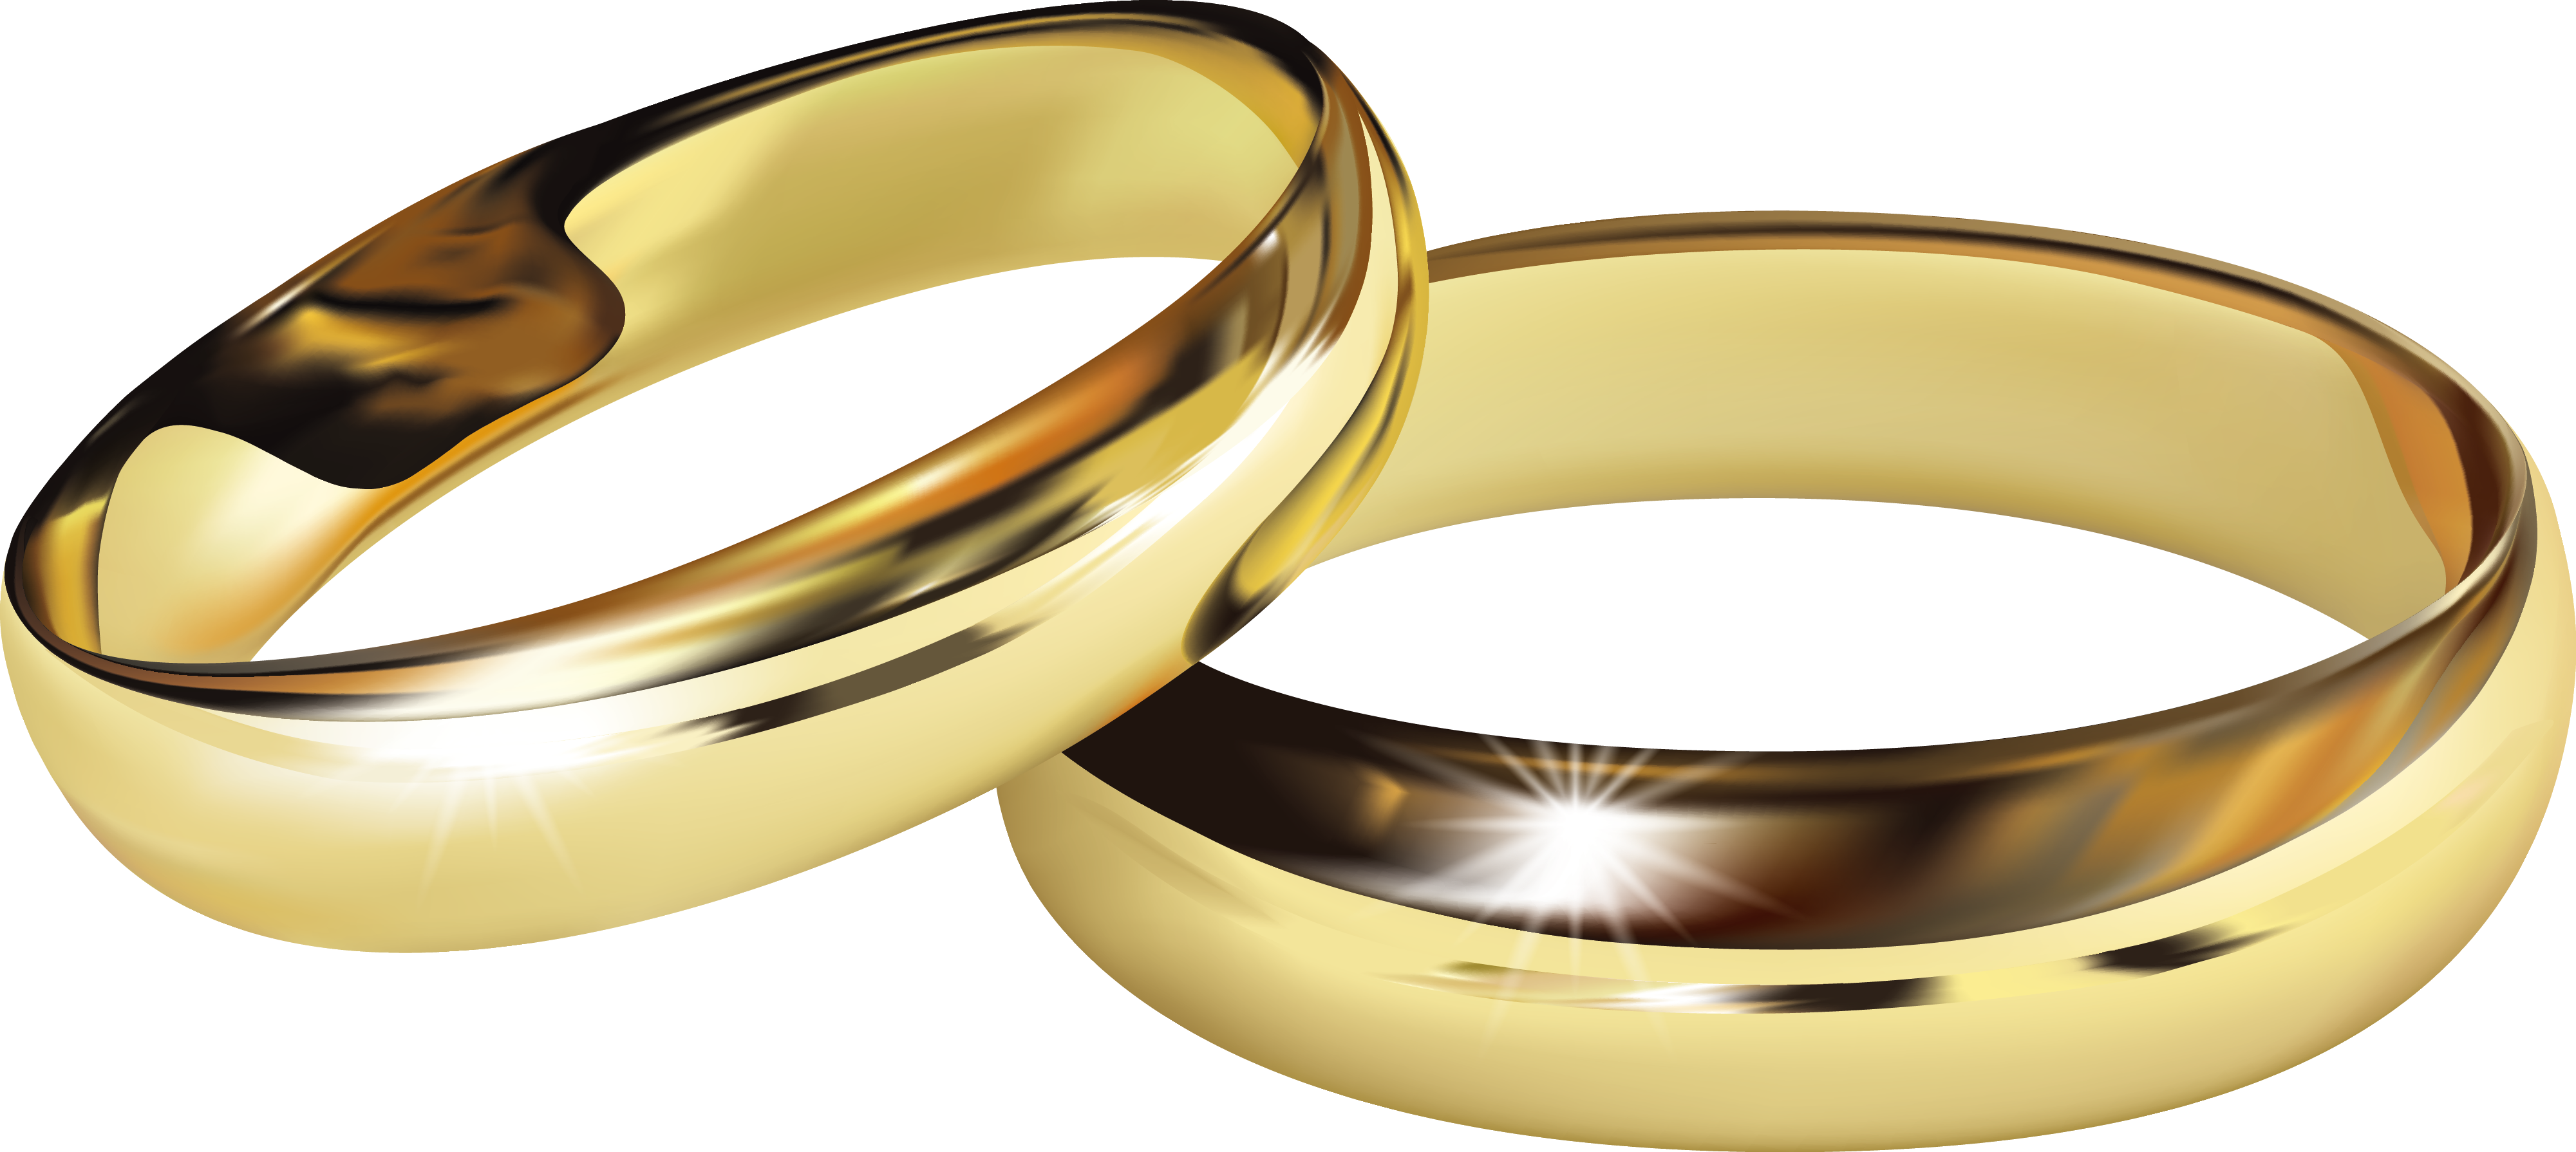 Wedding Rings Clipart Png